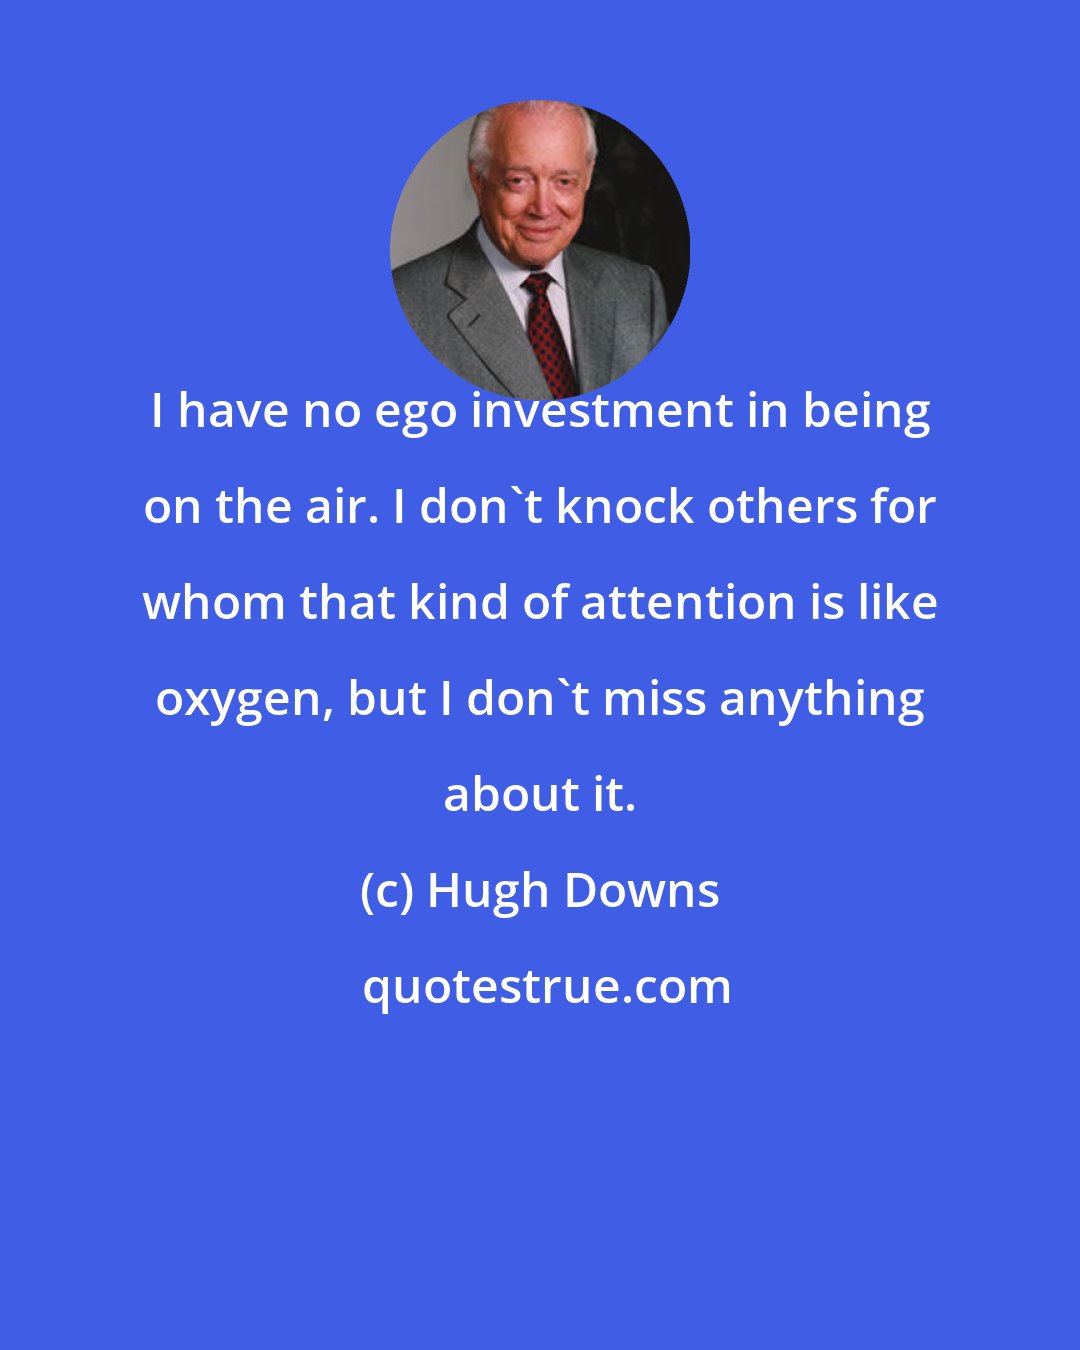 Hugh Downs: I have no ego investment in being on the air. I don't knock others for whom that kind of attention is like oxygen, but I don't miss anything about it.